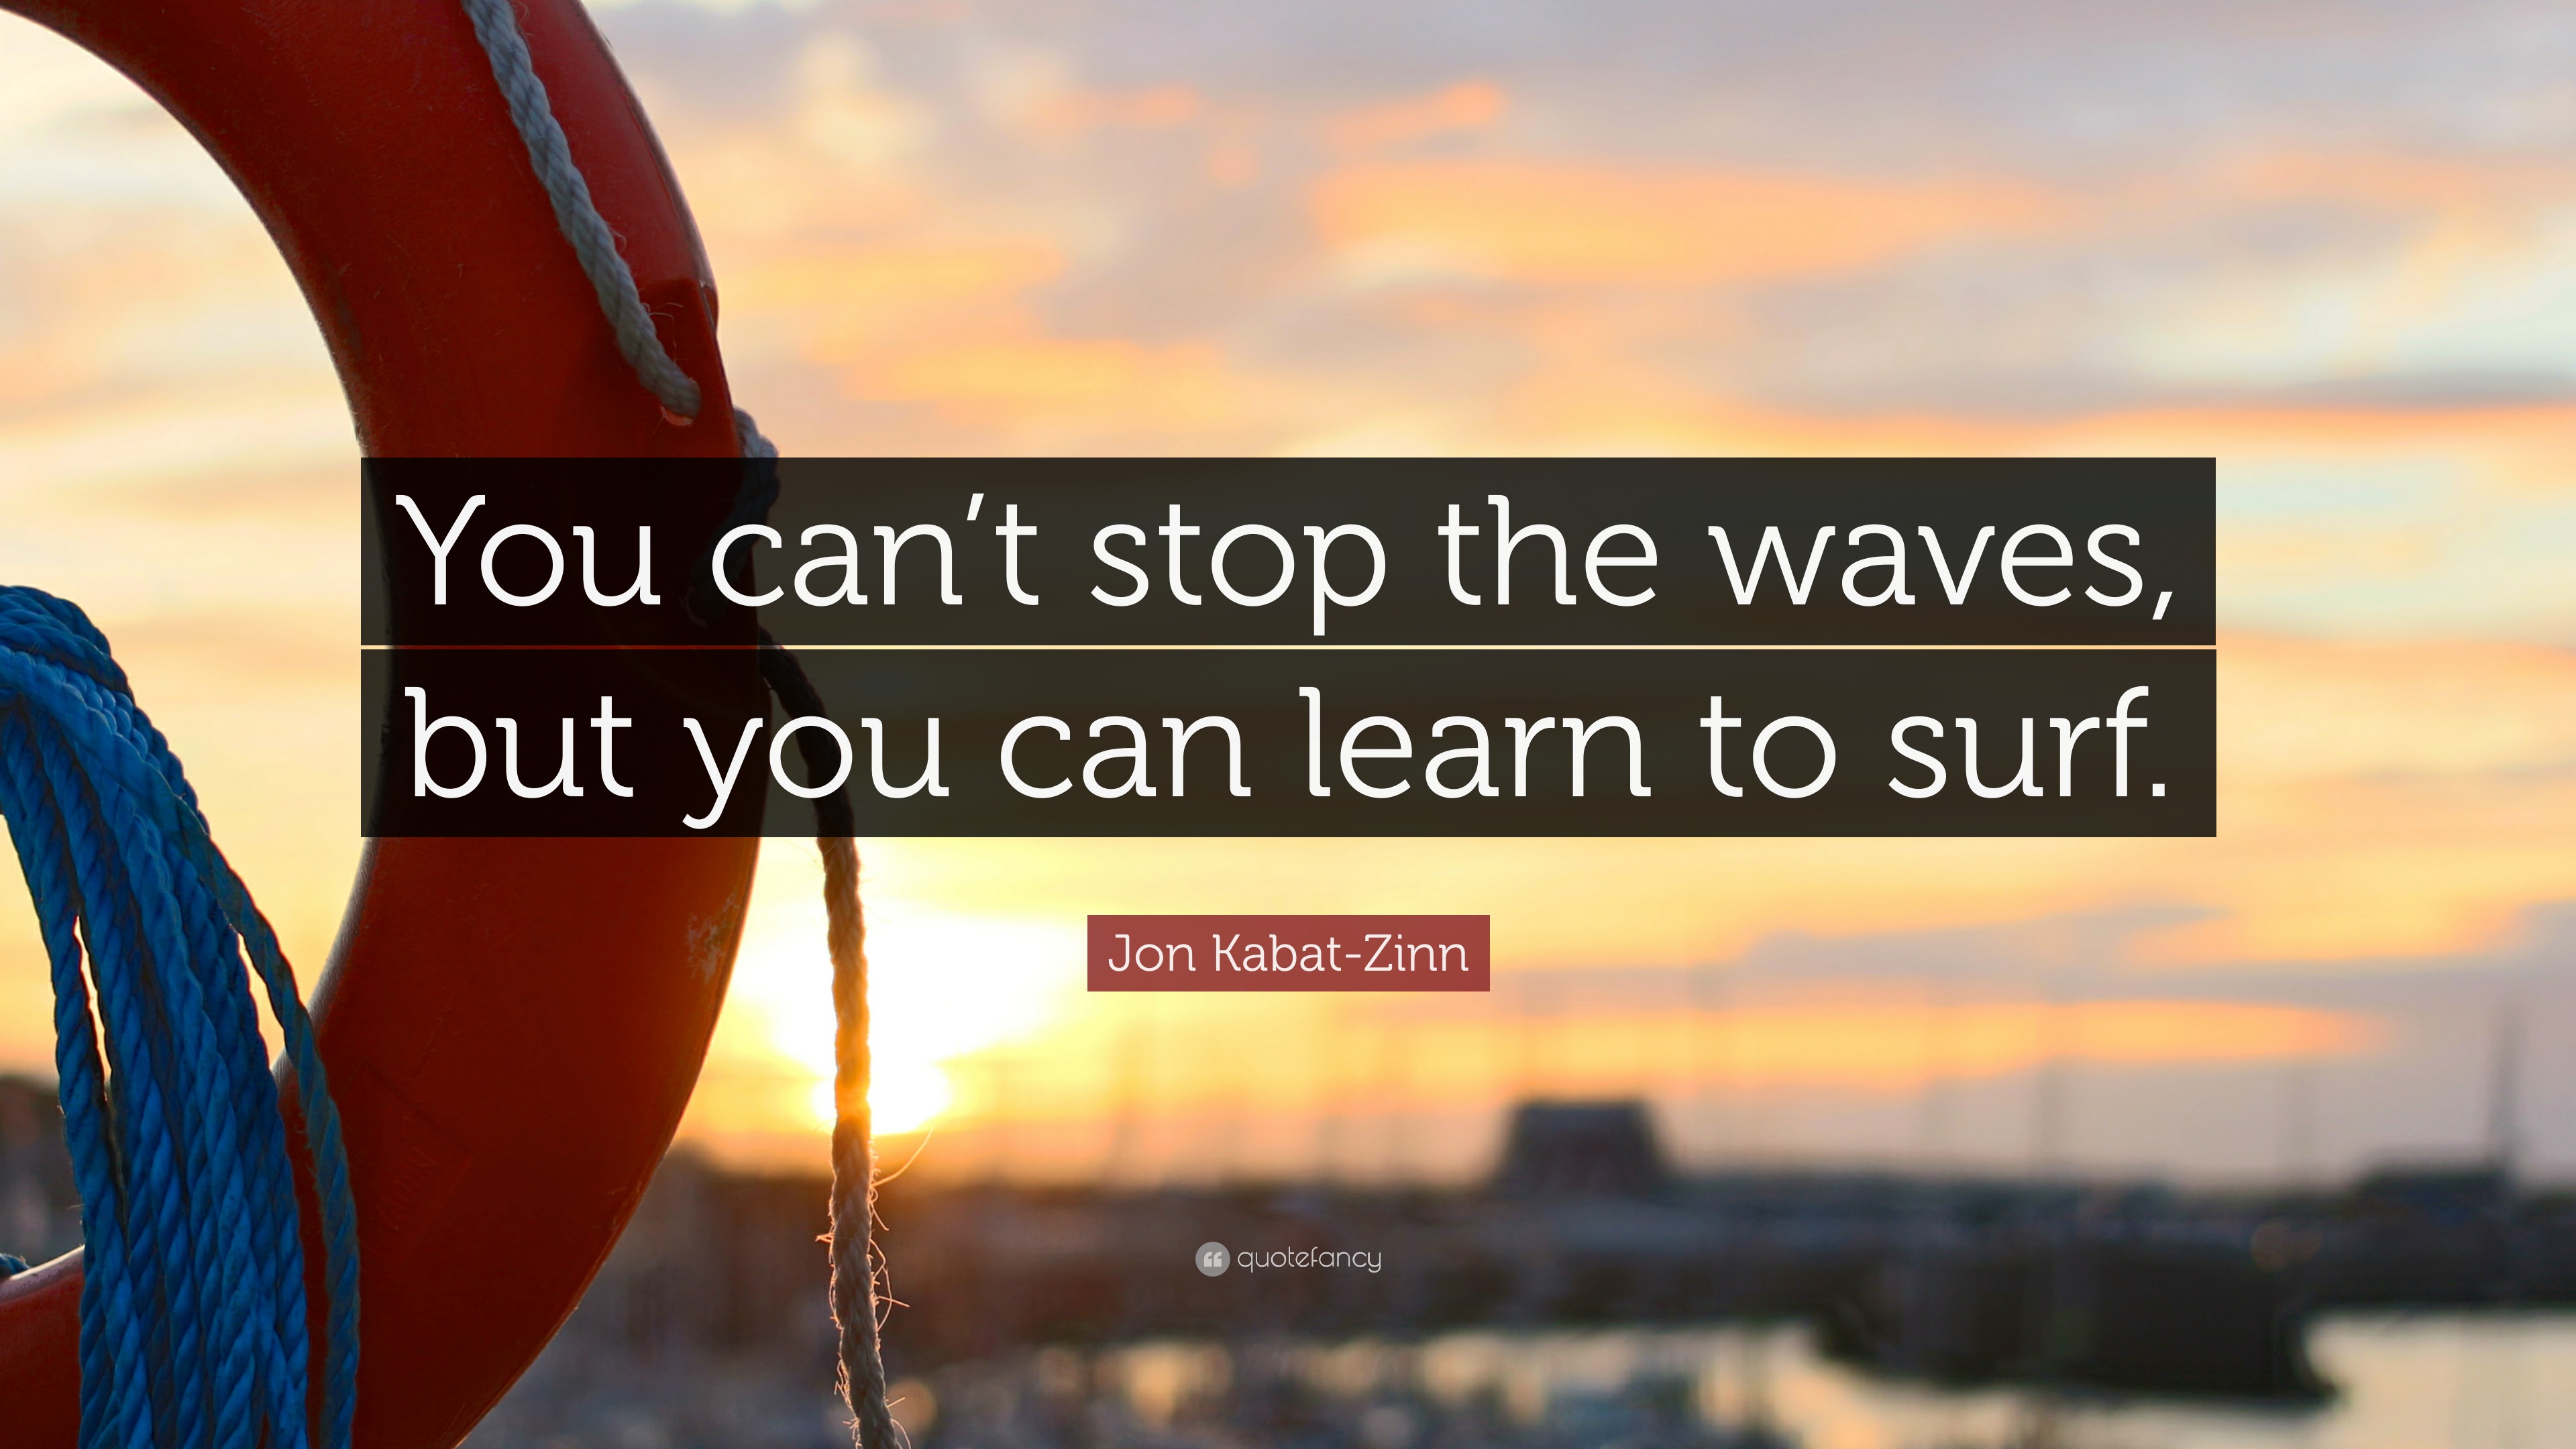 Jon Kabat Zinn Quote You Can T Stop The Waves But You Can Learn To Surf